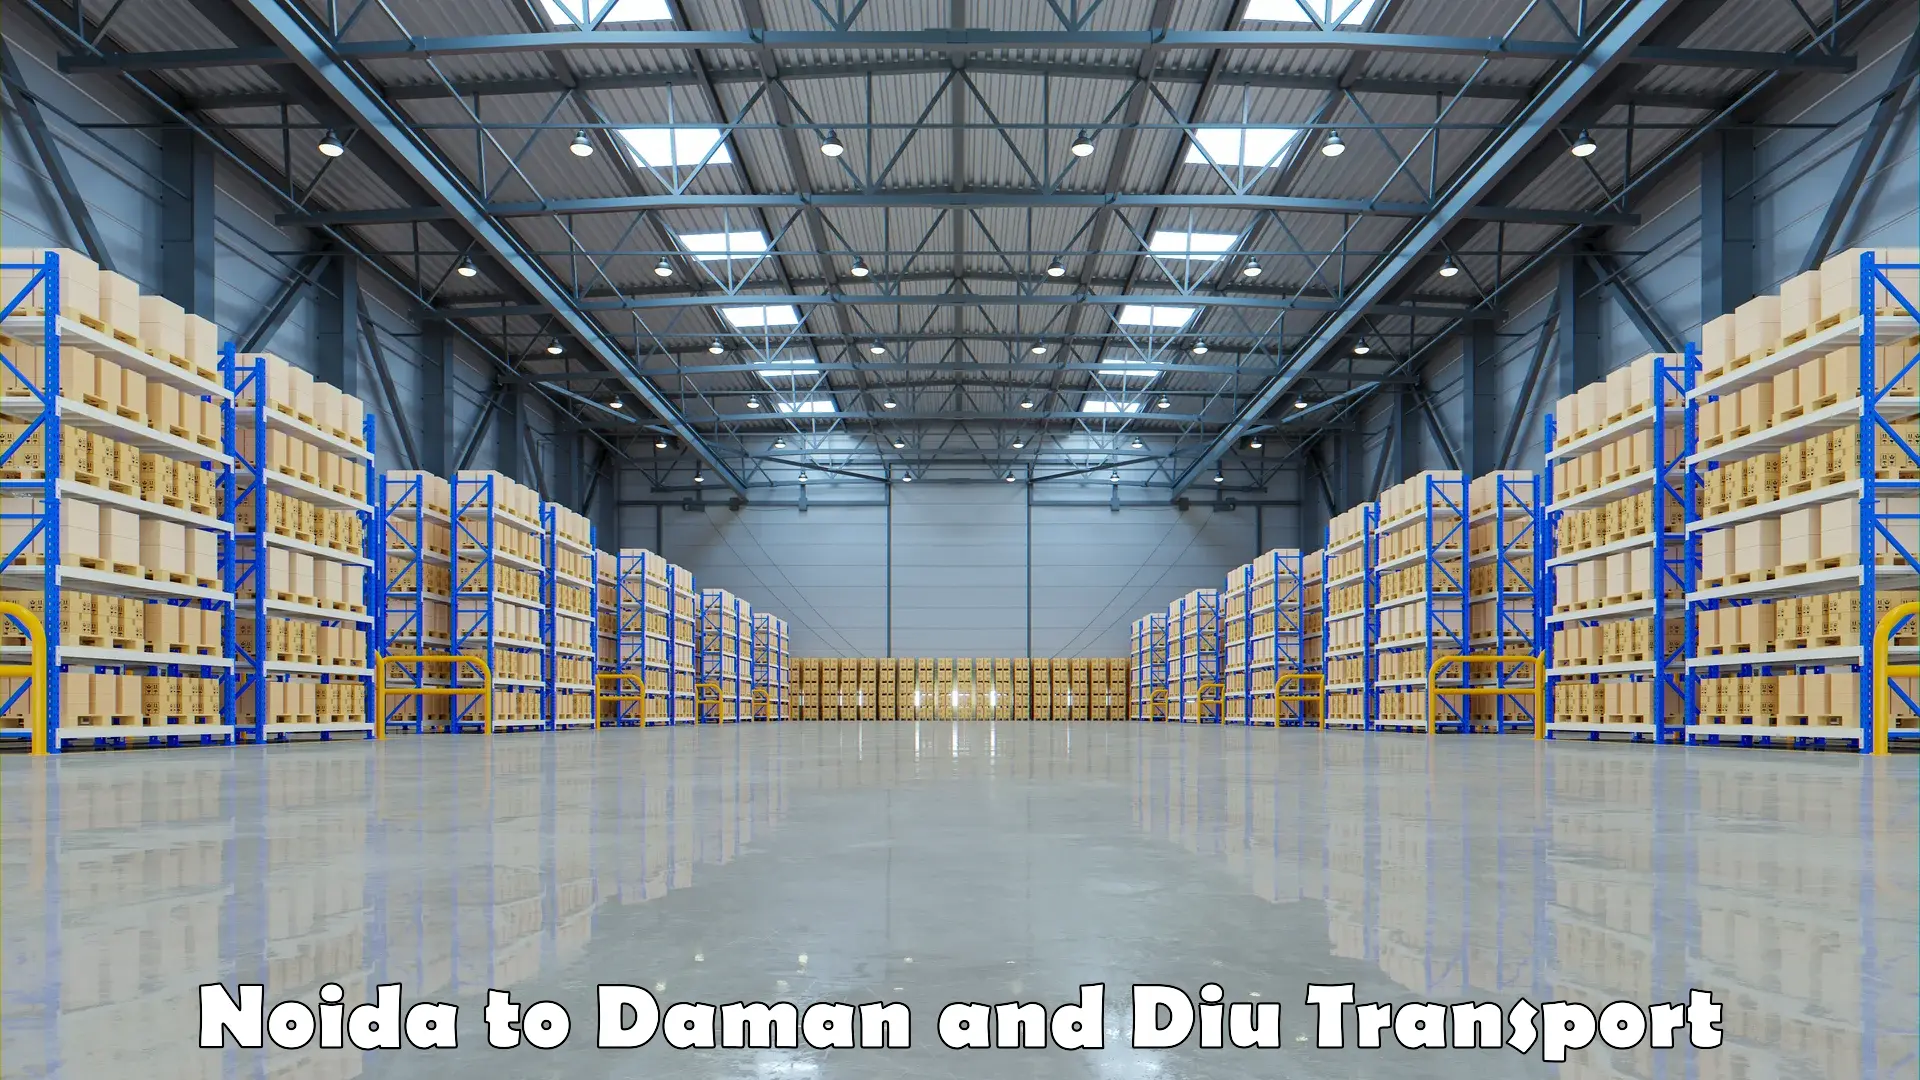 Nearby transport service Noida to Daman and Diu